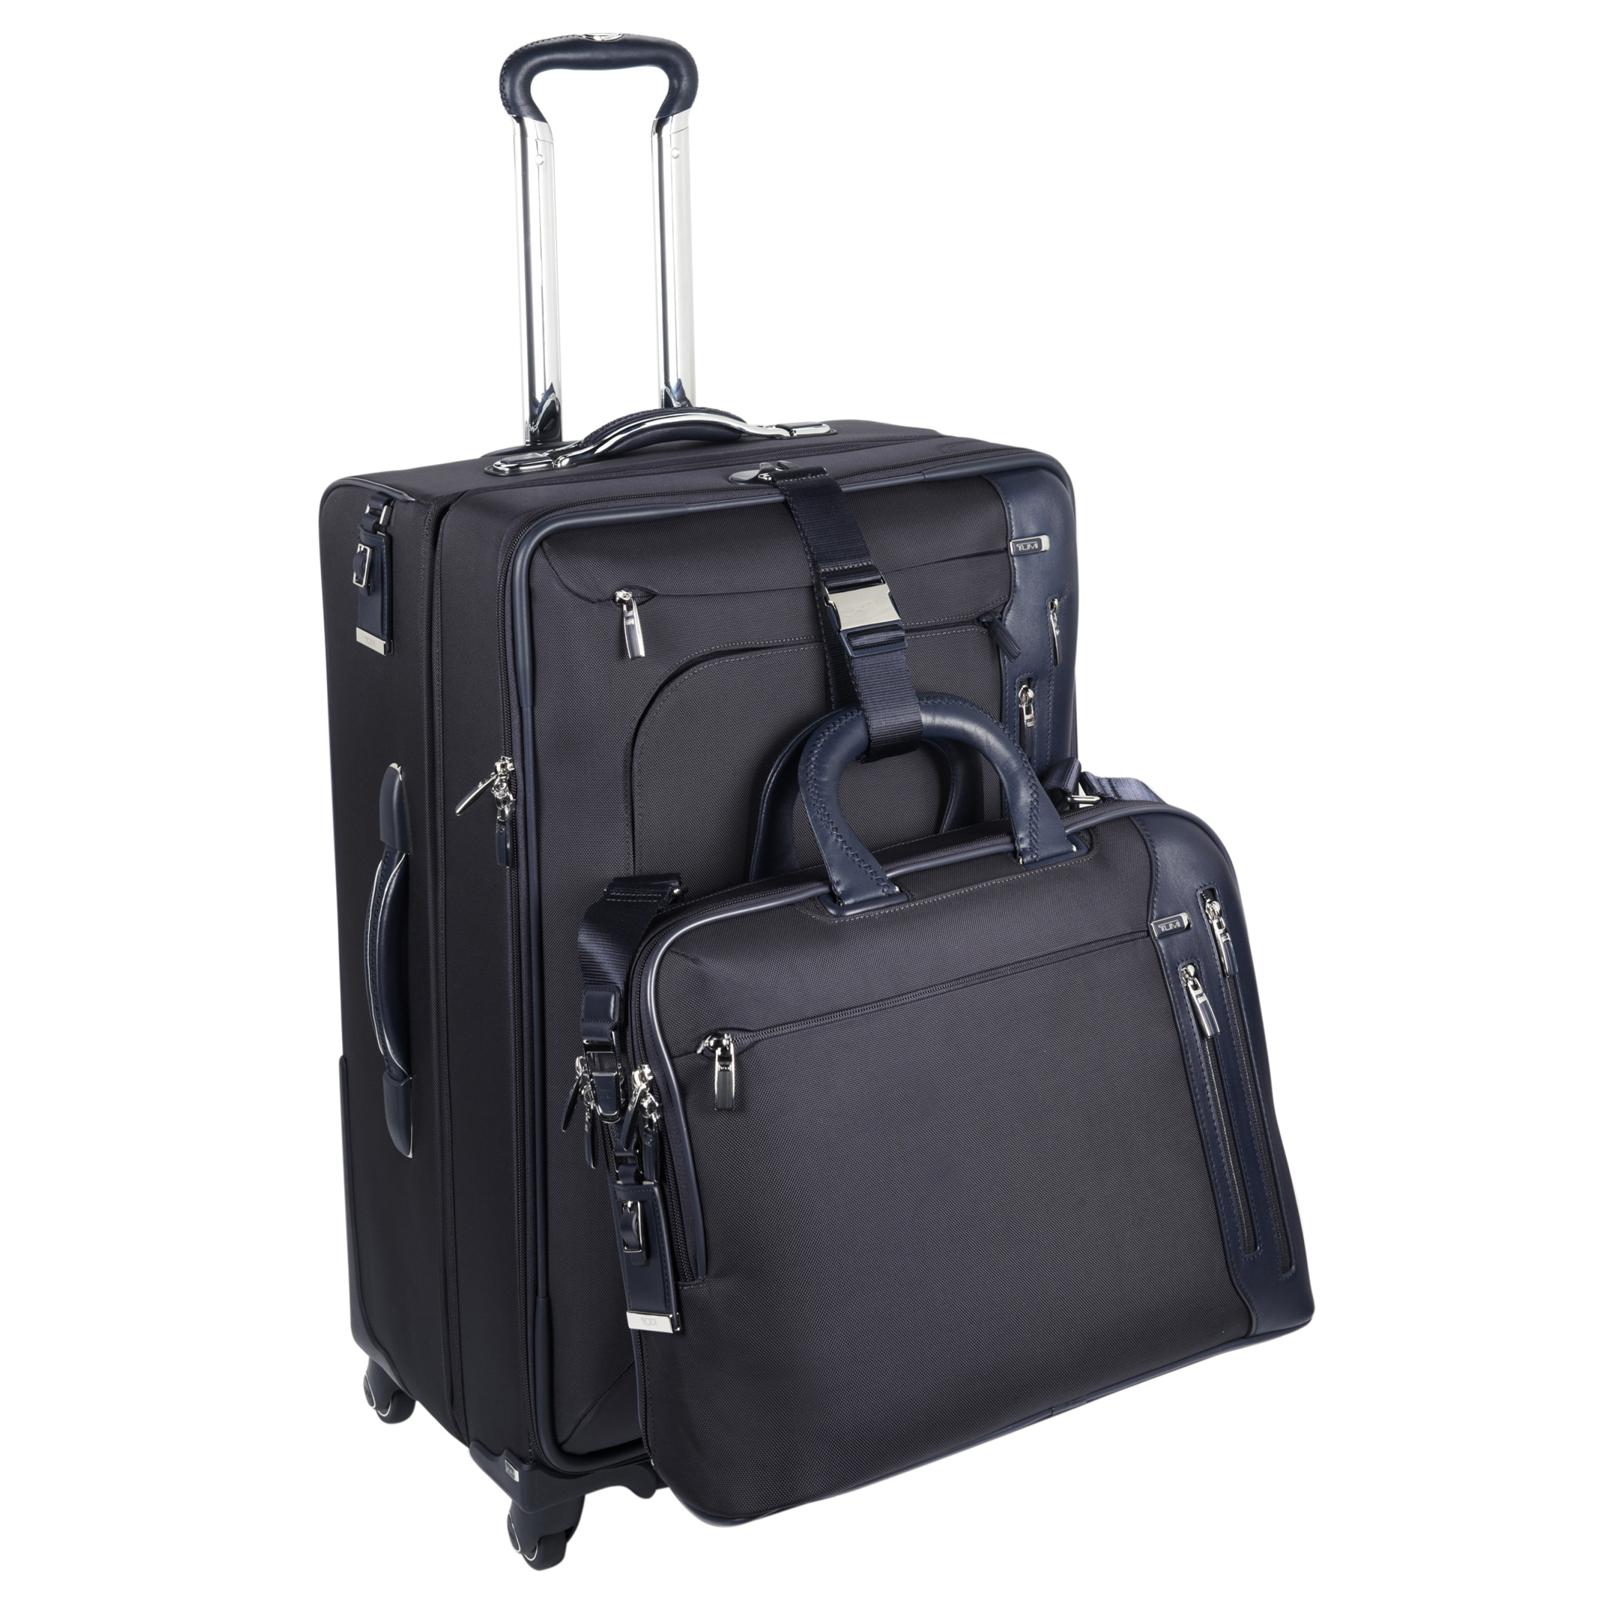 Tumi bags. TUMI - Voyageur Just In Case Tote Bag - Lightweight Packable Foldable Travel Bag for ...